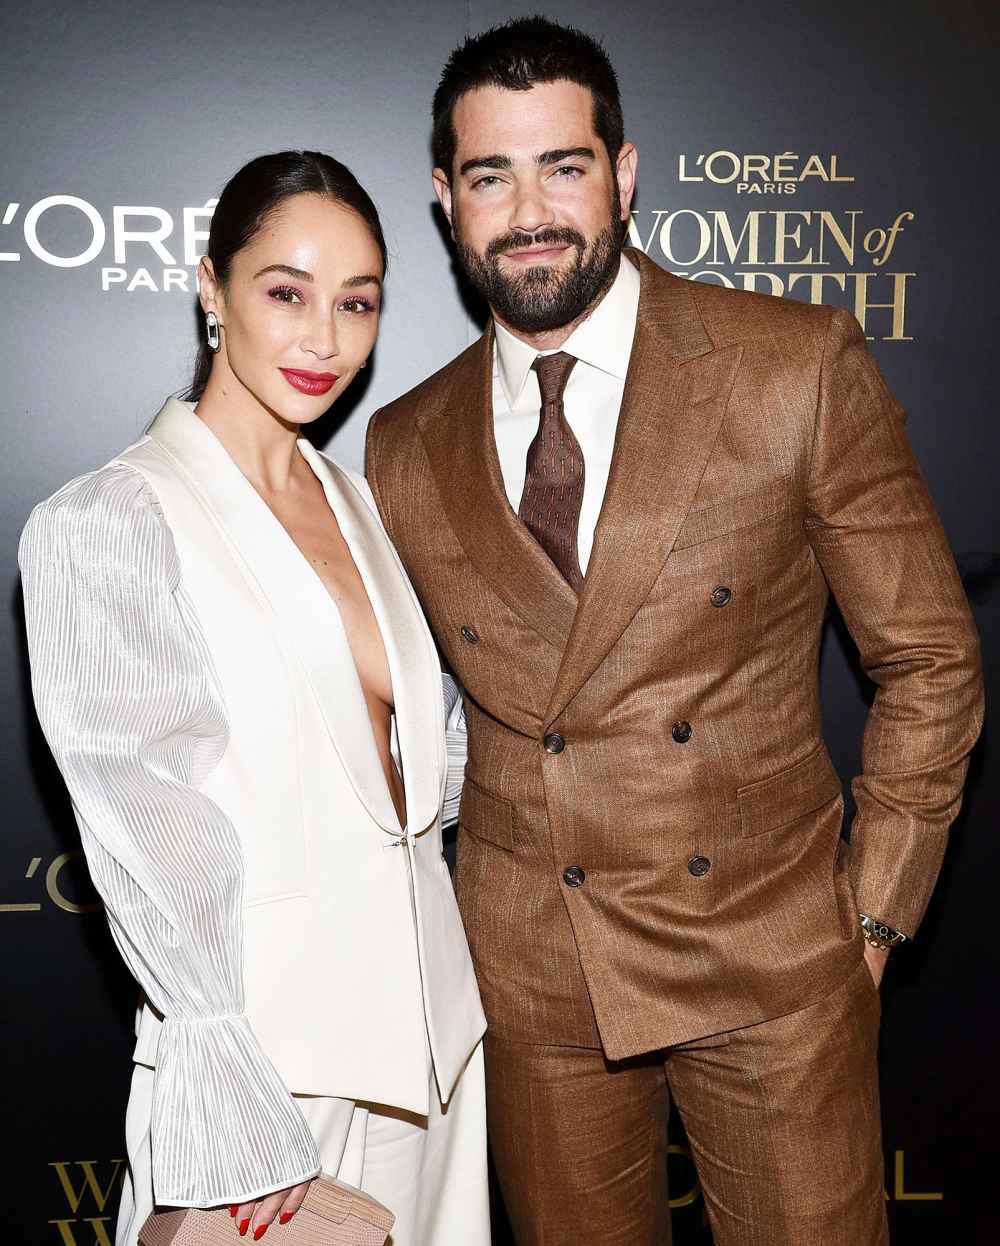 Cara Santana and Jesse Metcalfe in 2019 Cara Santana Is Dating Thirty Seconds to Mars Shannon Leto After Jesse Metcalfe Split